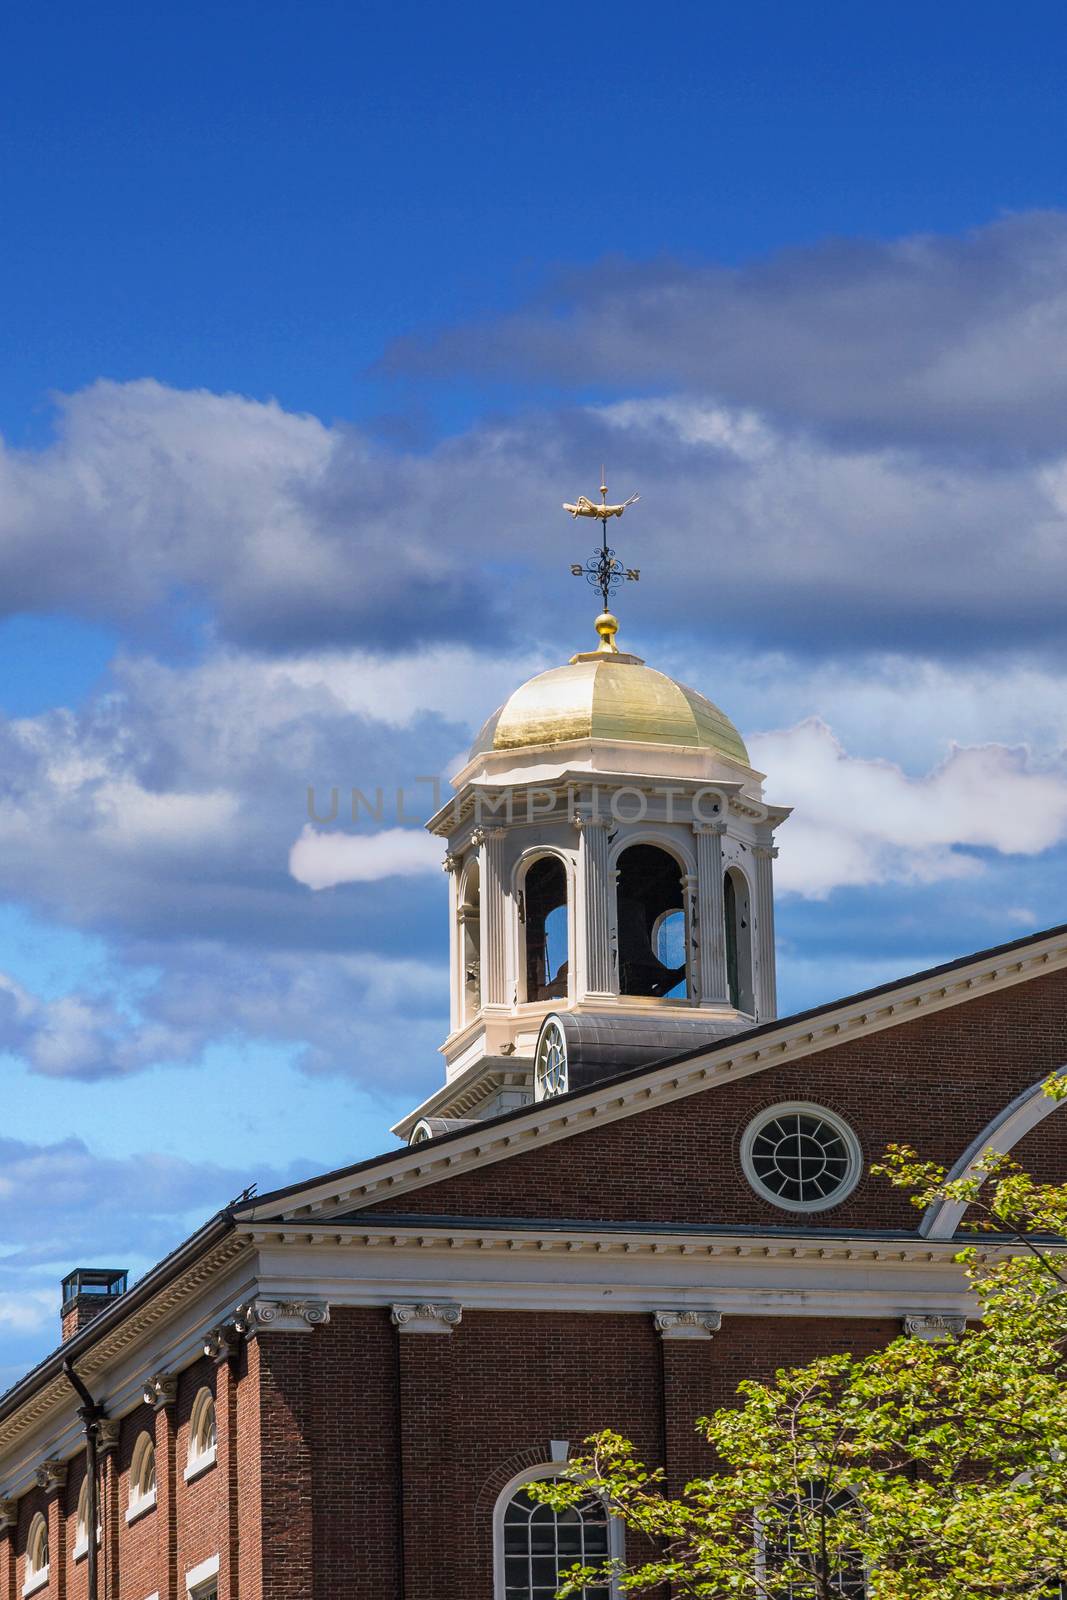 Gold Dome on Boston Bell Tower under Nice Sky